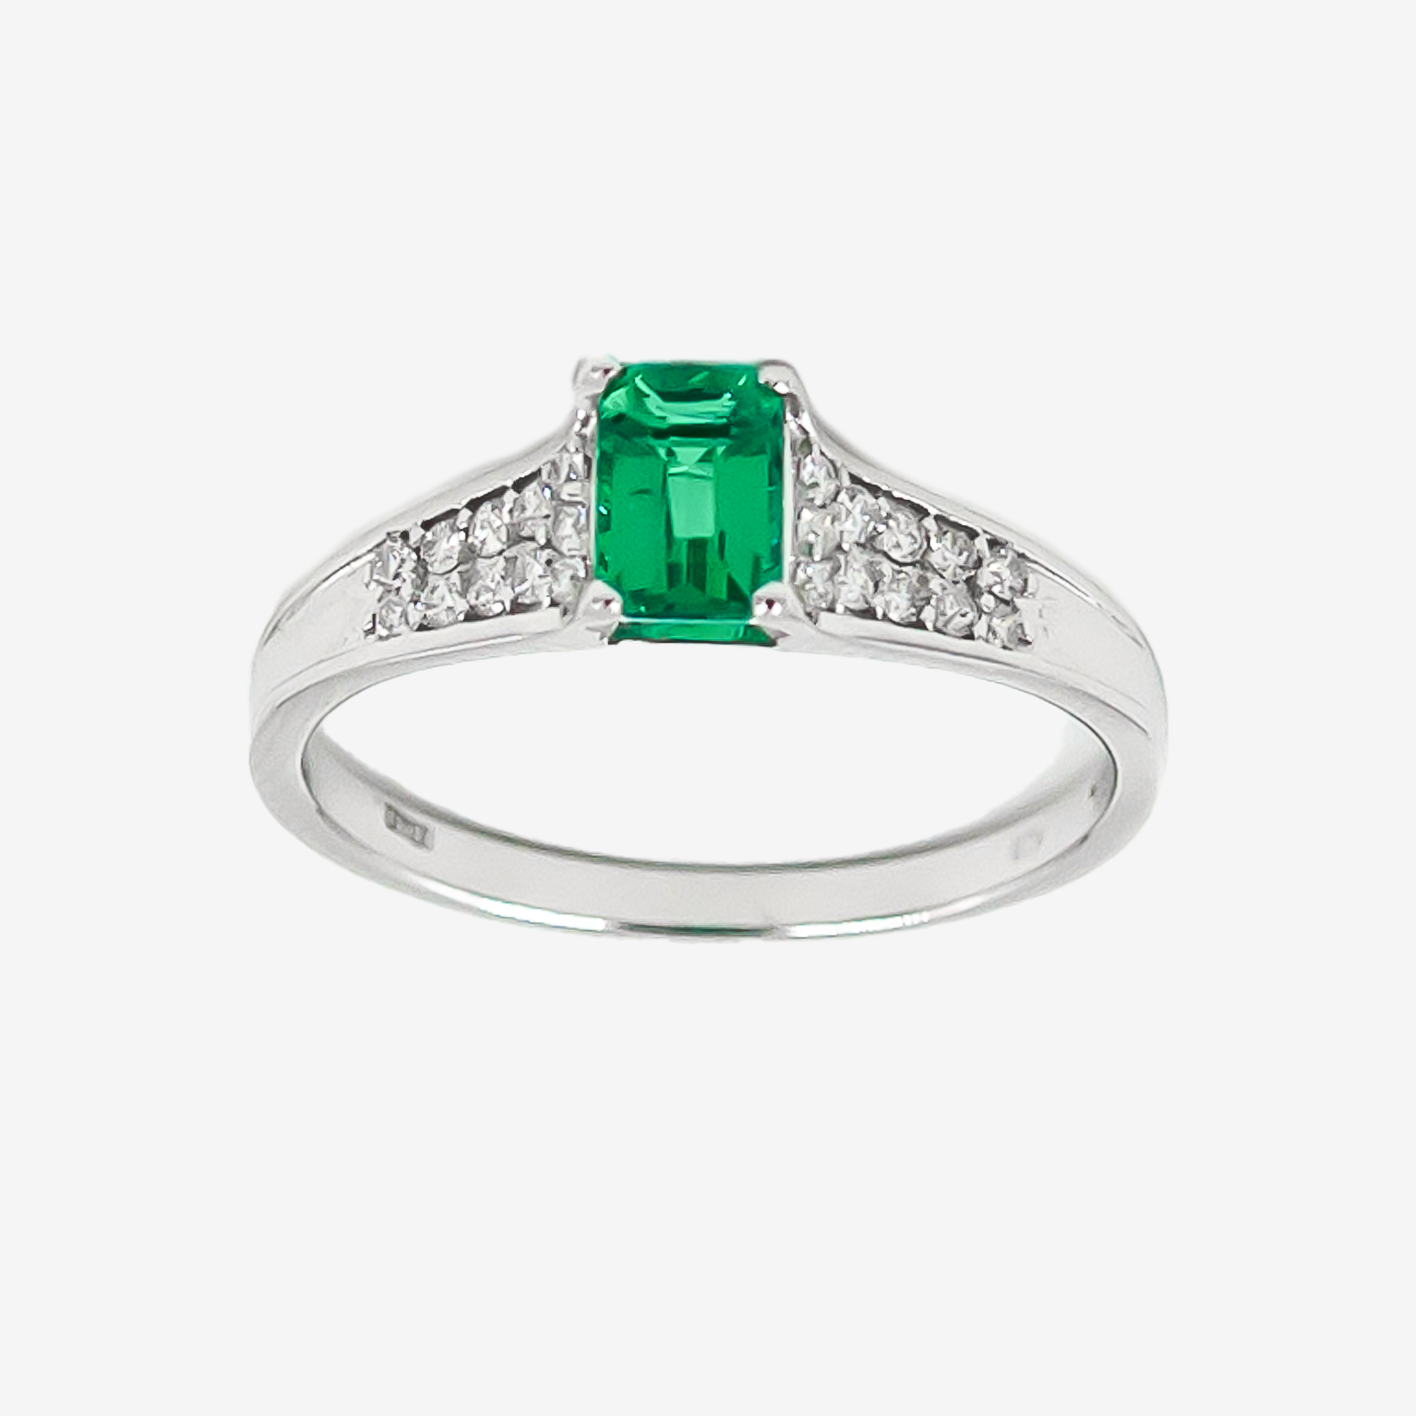 India Green Emerald Ring with Diamonds 